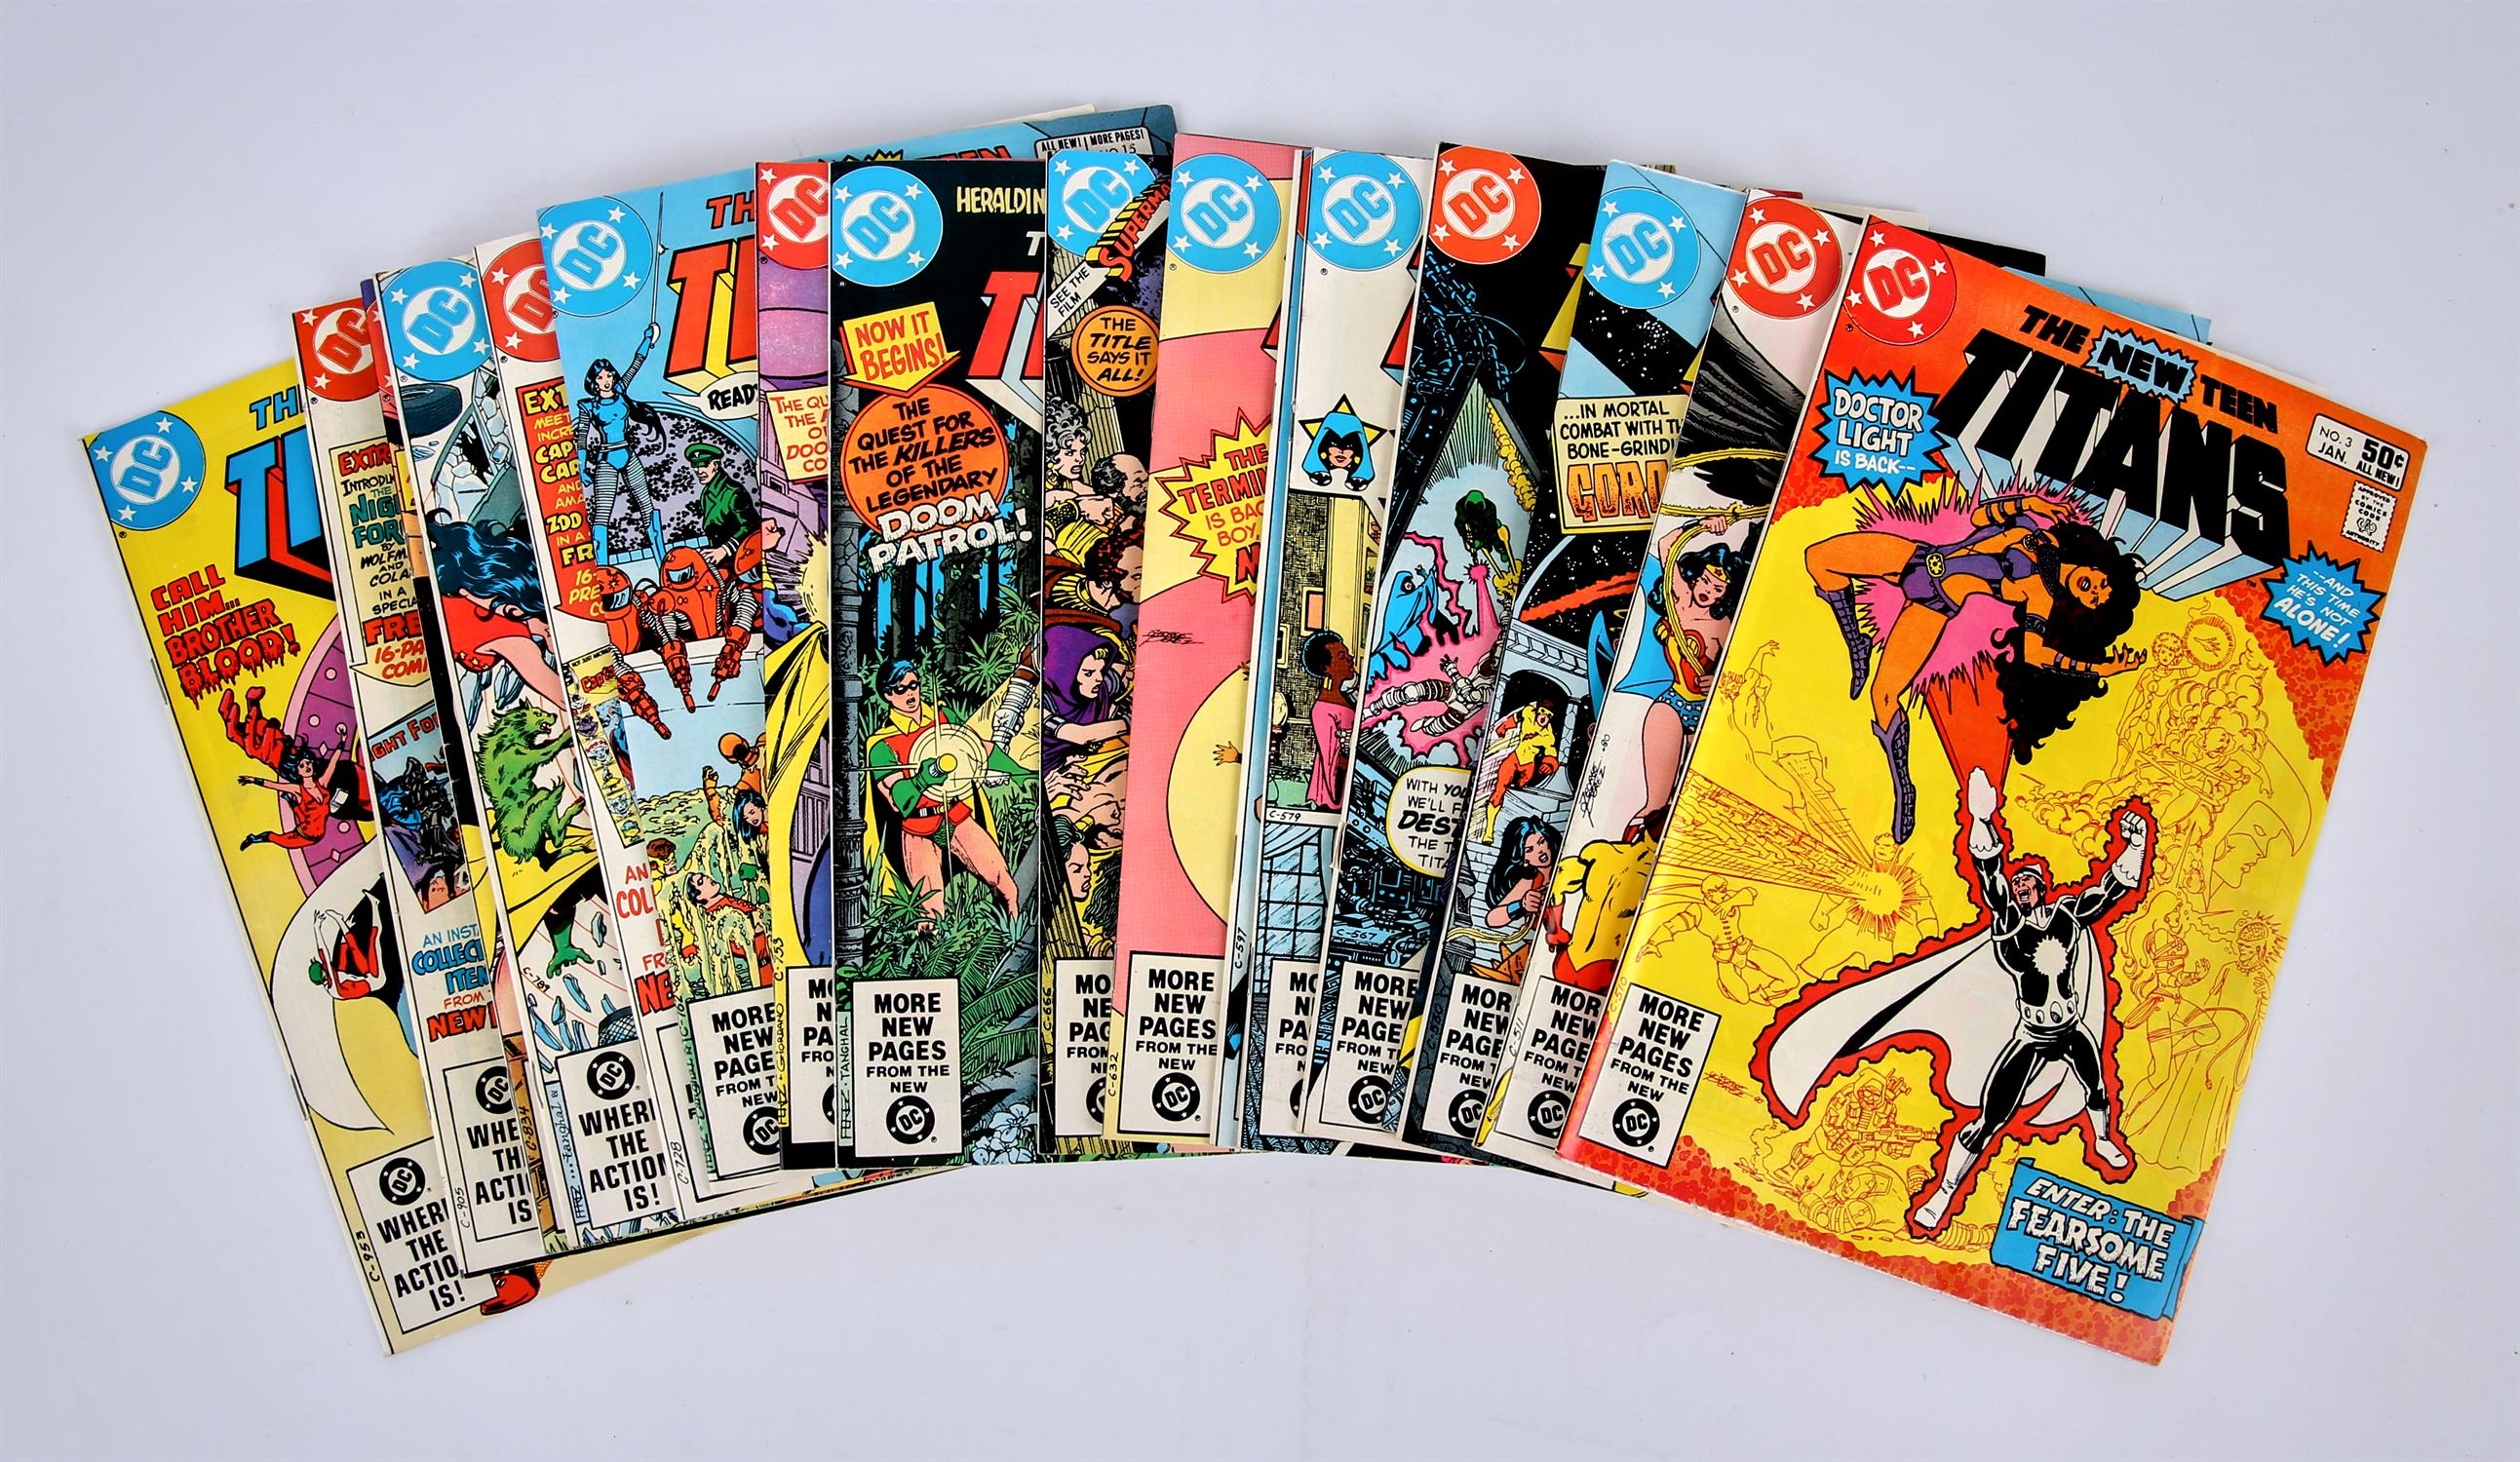 The New Teen Titans: 44 Issues including the 1st appearance of Deathstroke (DC Comics, - Image 4 of 4